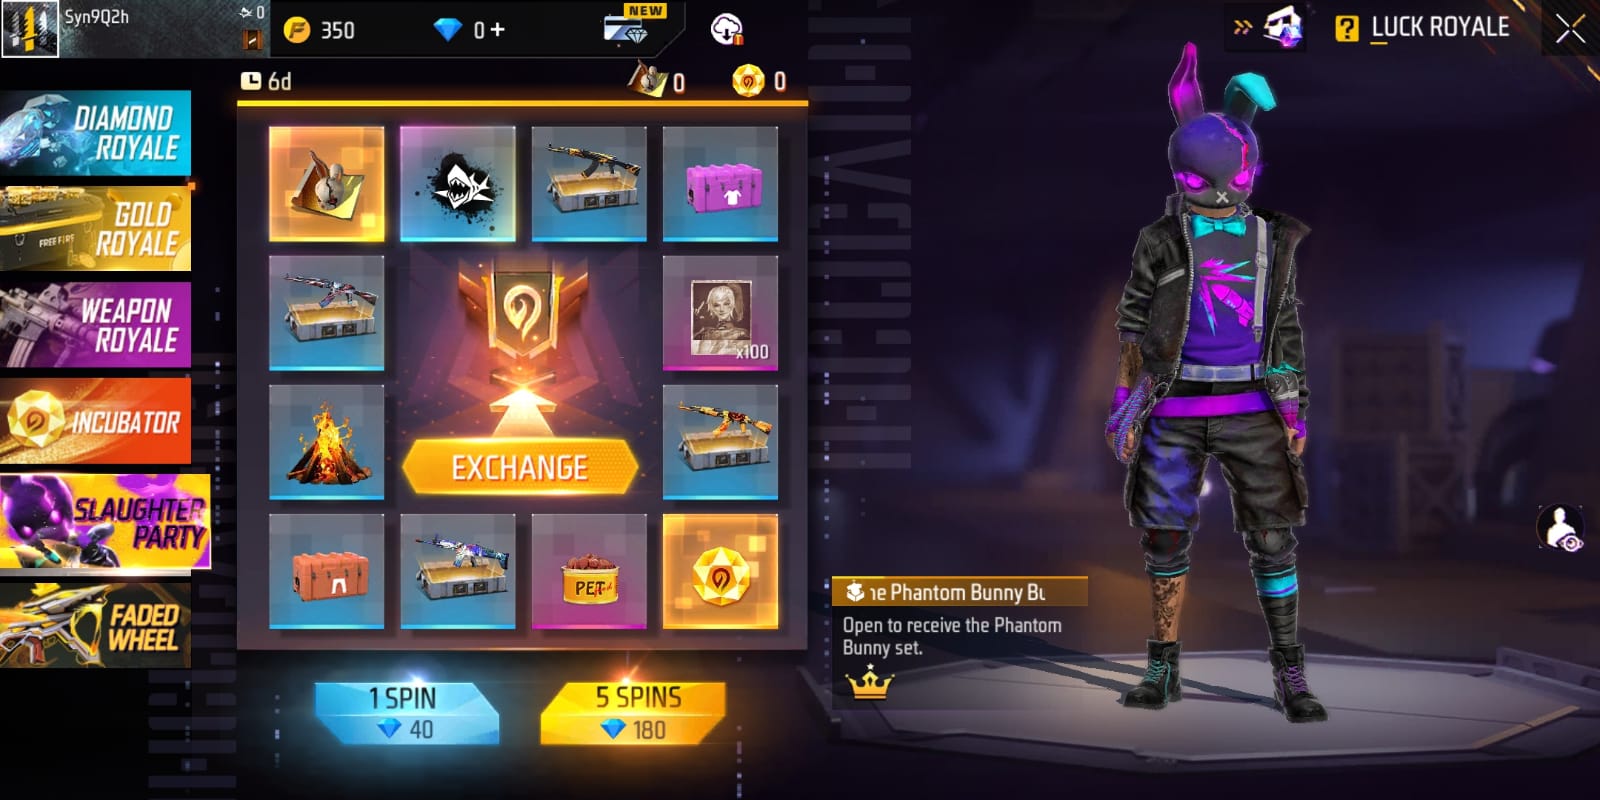 Free Fire MAX Slaughter Party Event: Get The Phantom Bunny Bundle, and more rewards, ALL DETAILS about the latest Free Fire MAX Incubator Event